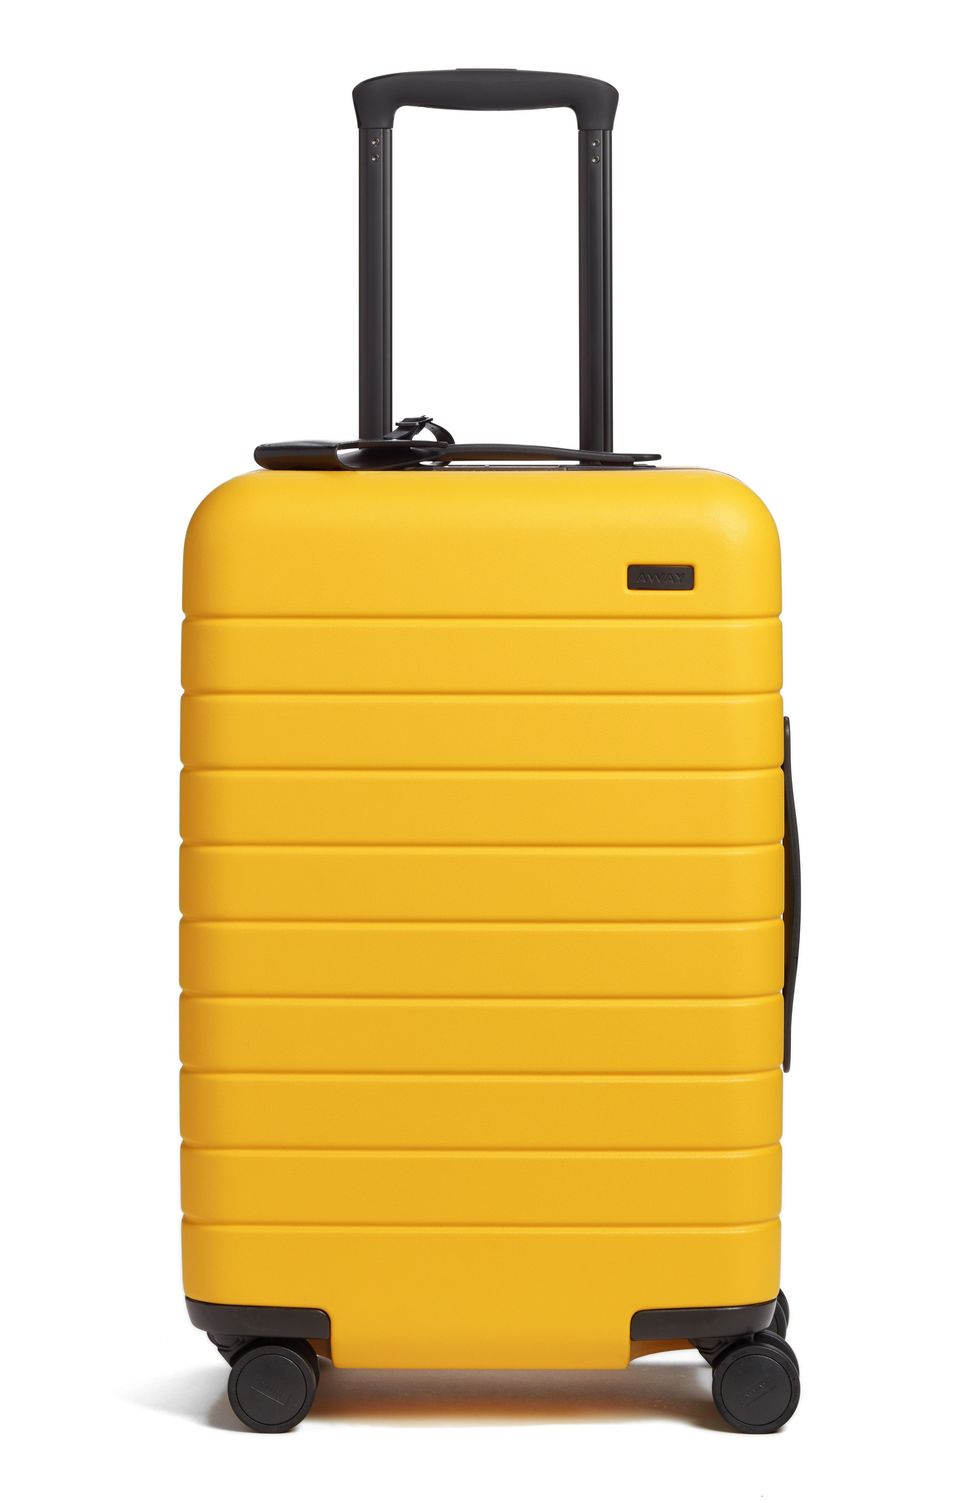 The Carry-On Hard Shell Suitcase in Yellow